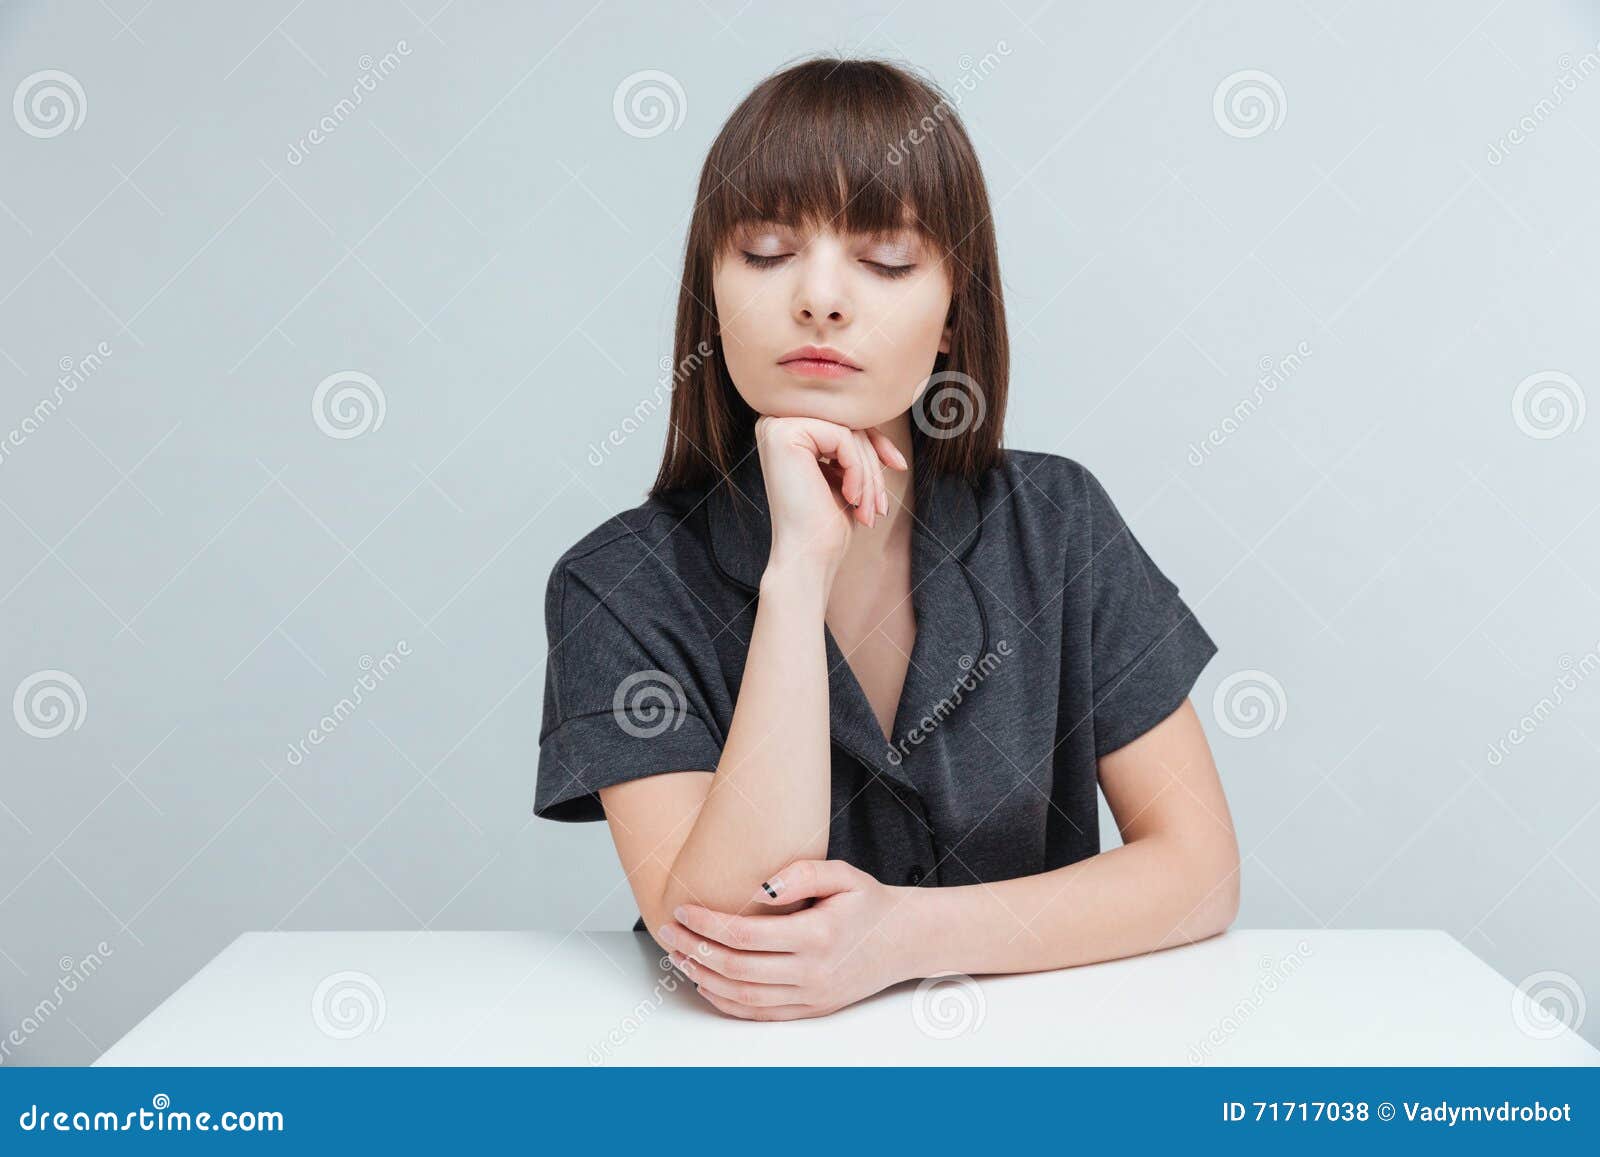 Woman with Closed Eyes Sitting at the Table Stock Photo - Image of ...